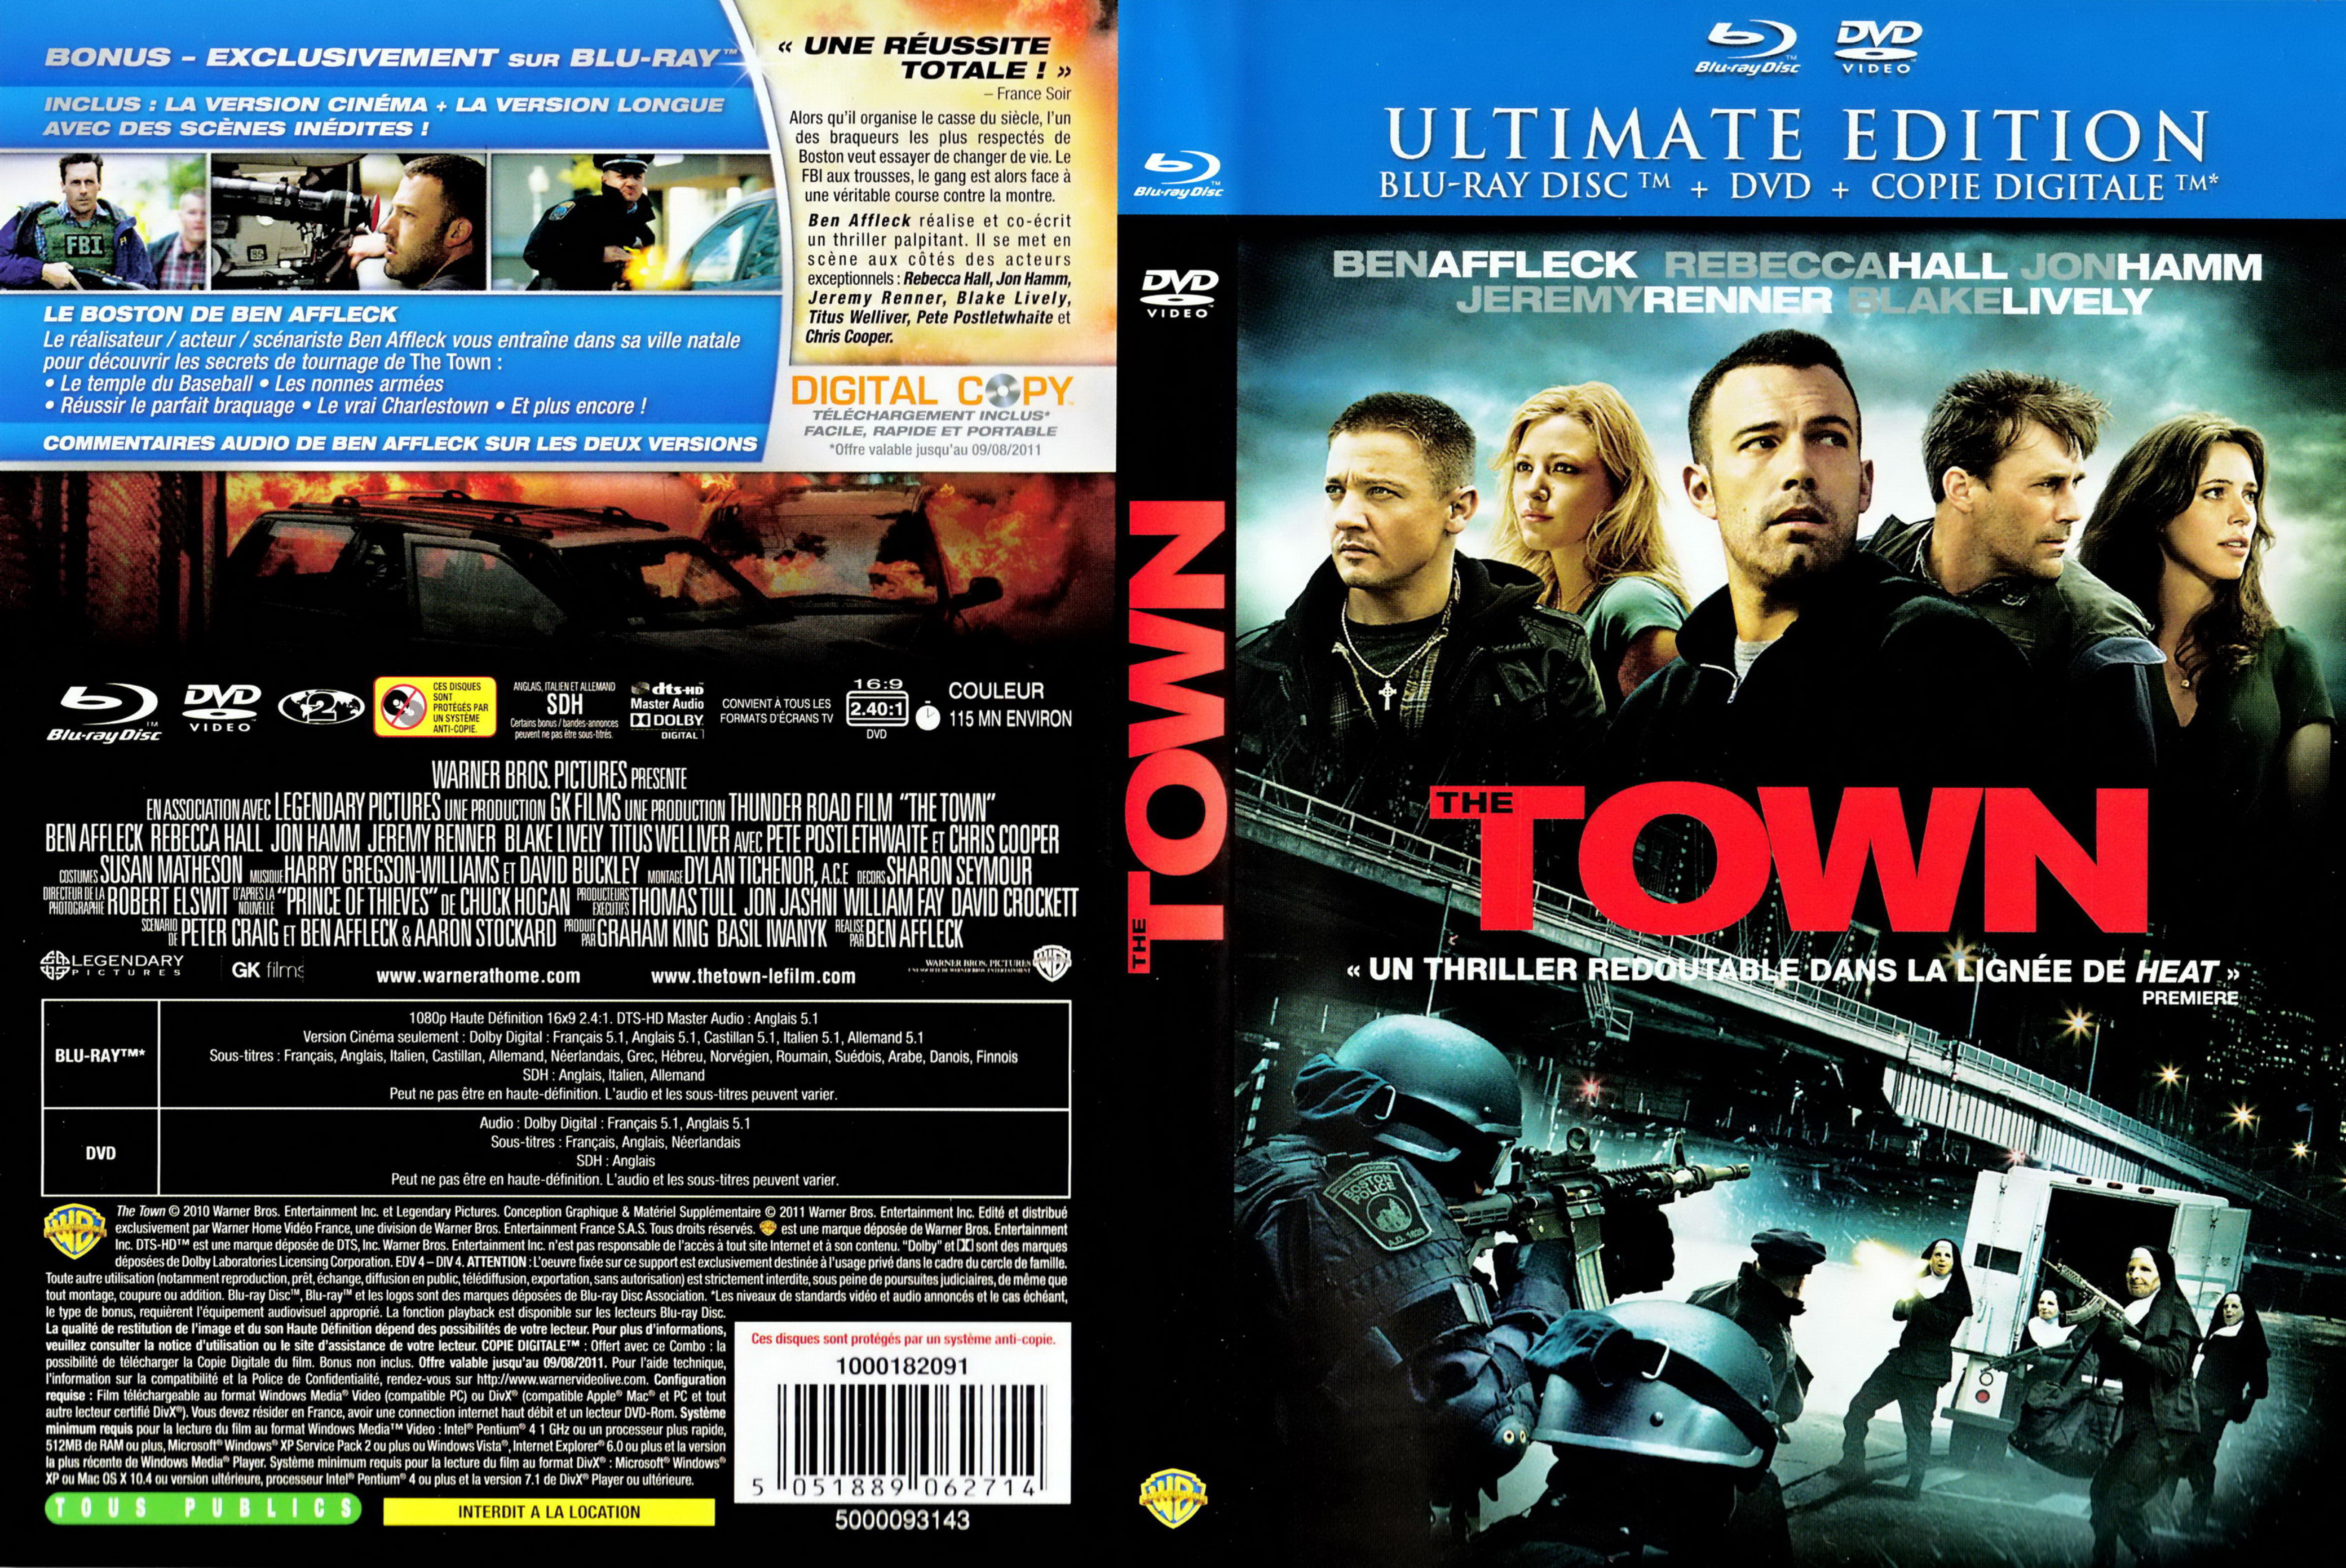 Jaquette DVD The town (BLU-RAY)